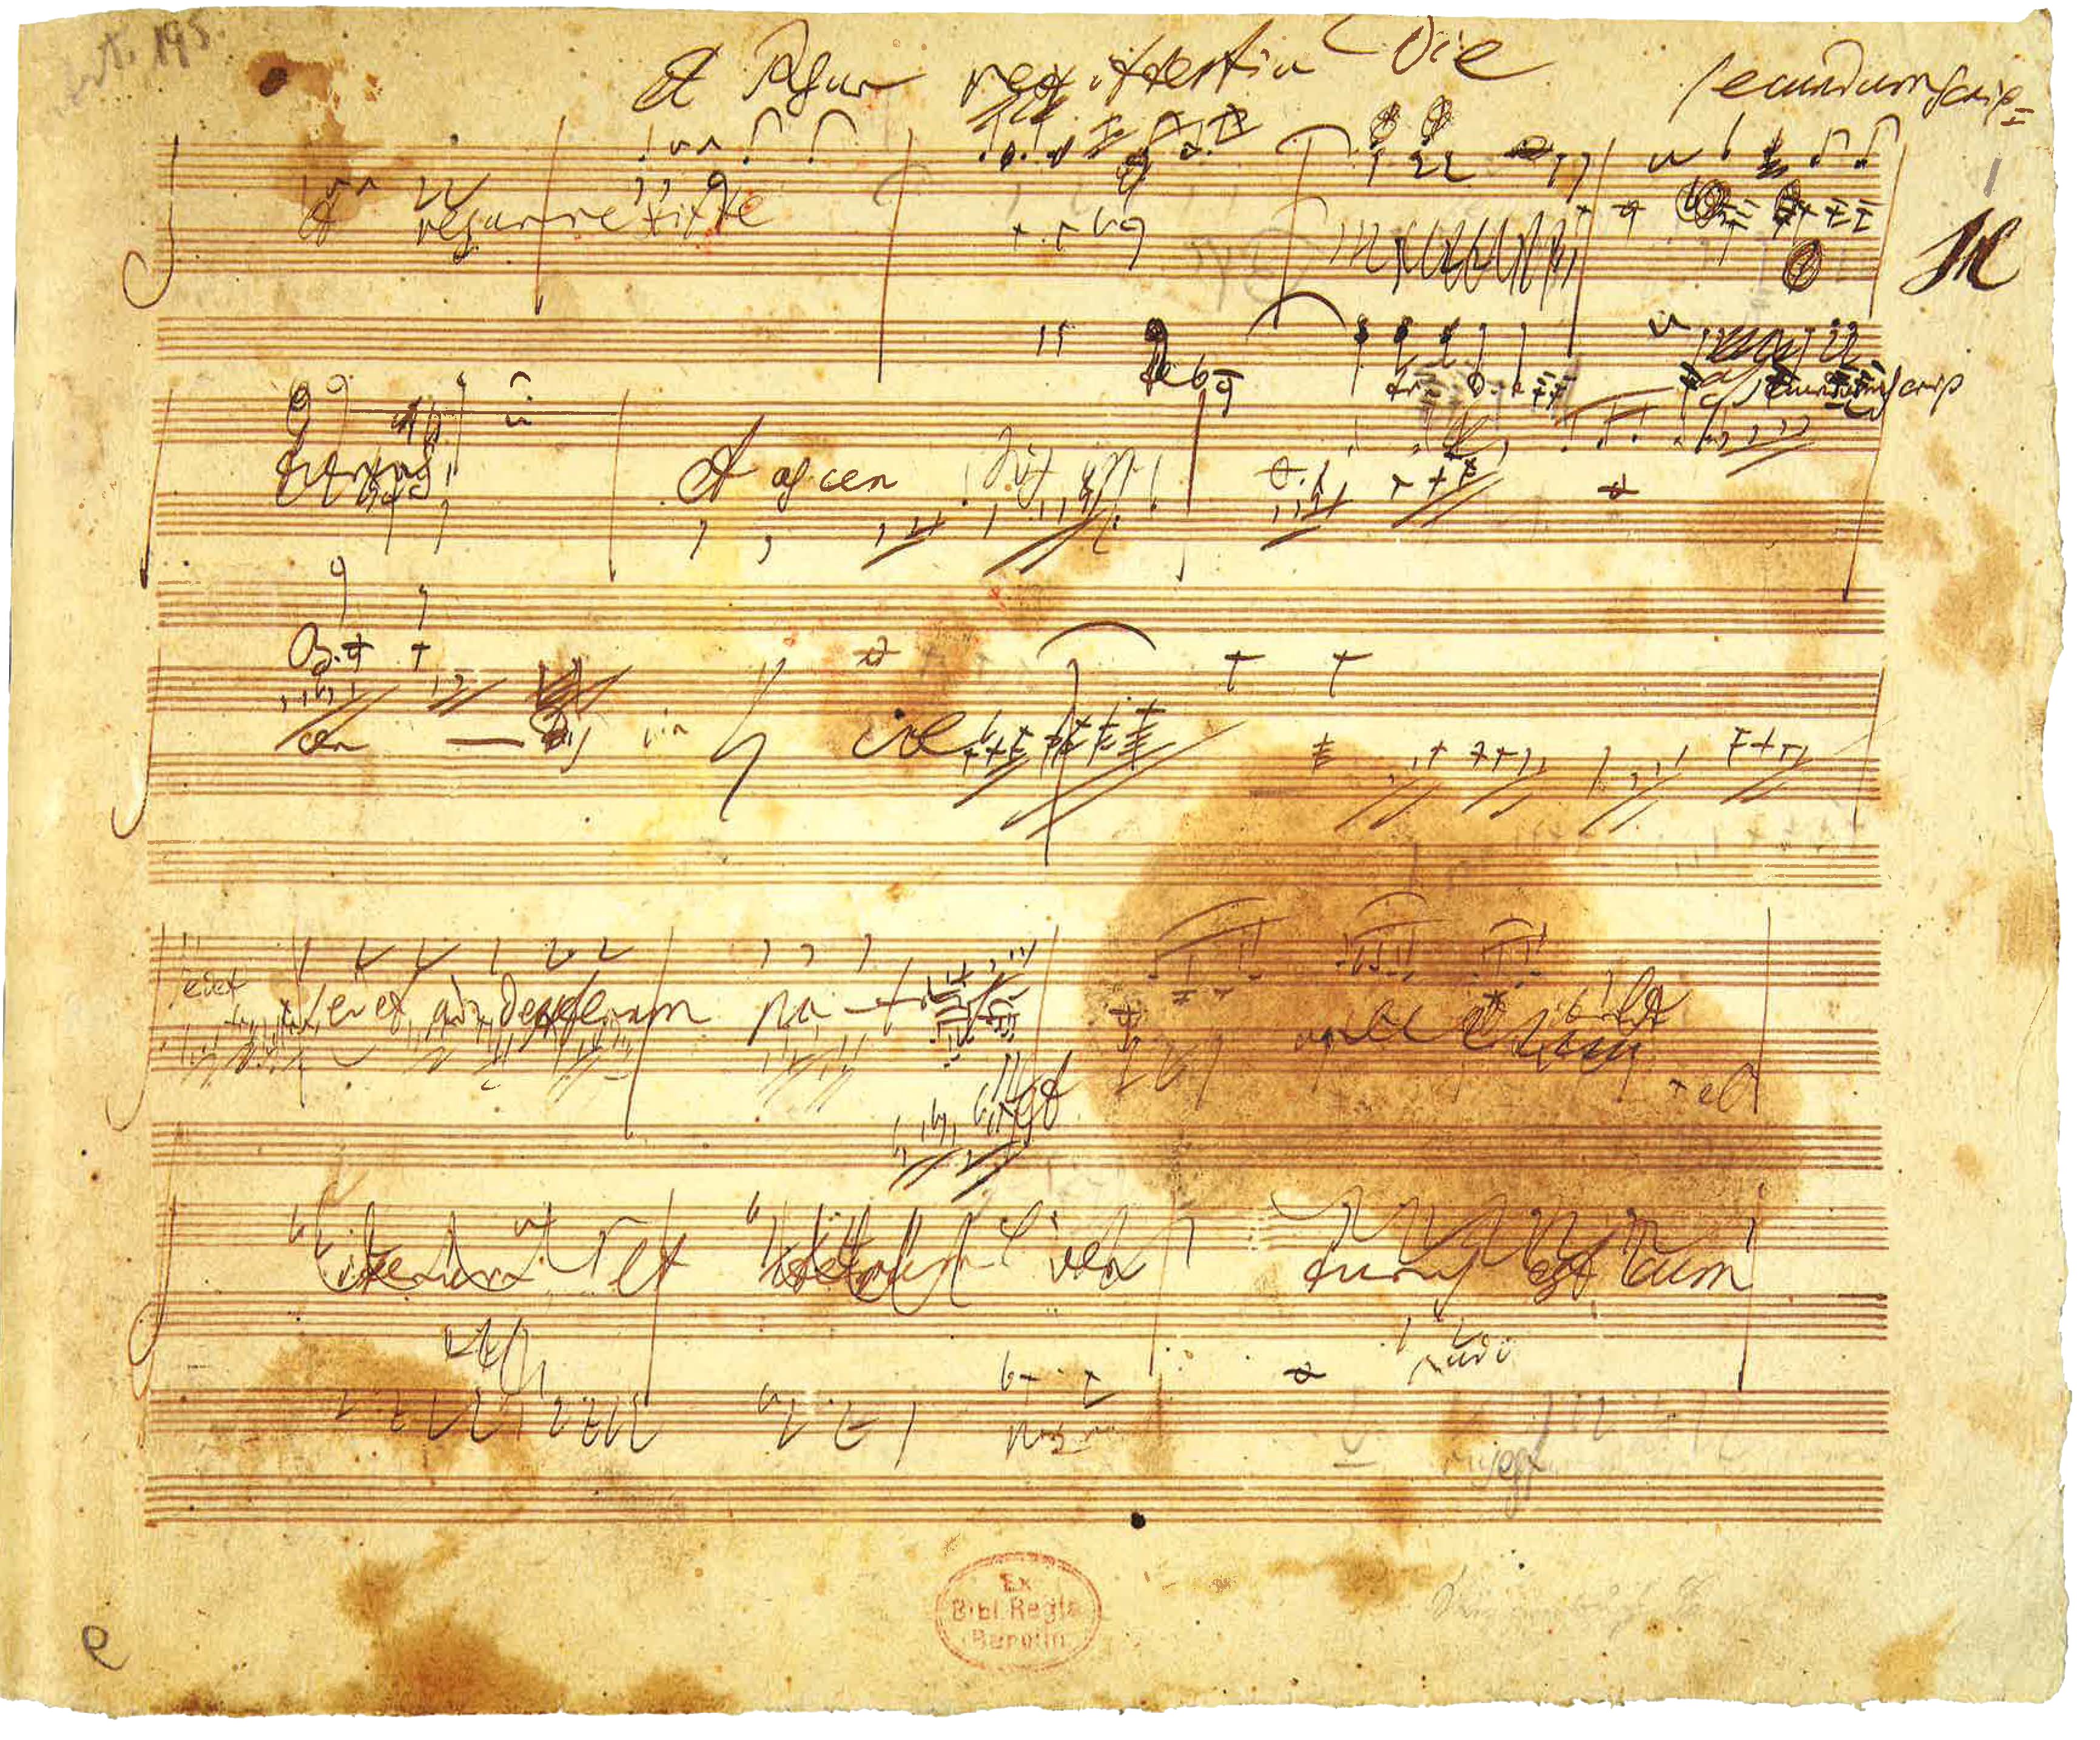 A page of extremely smudged and yellowed sheet music.